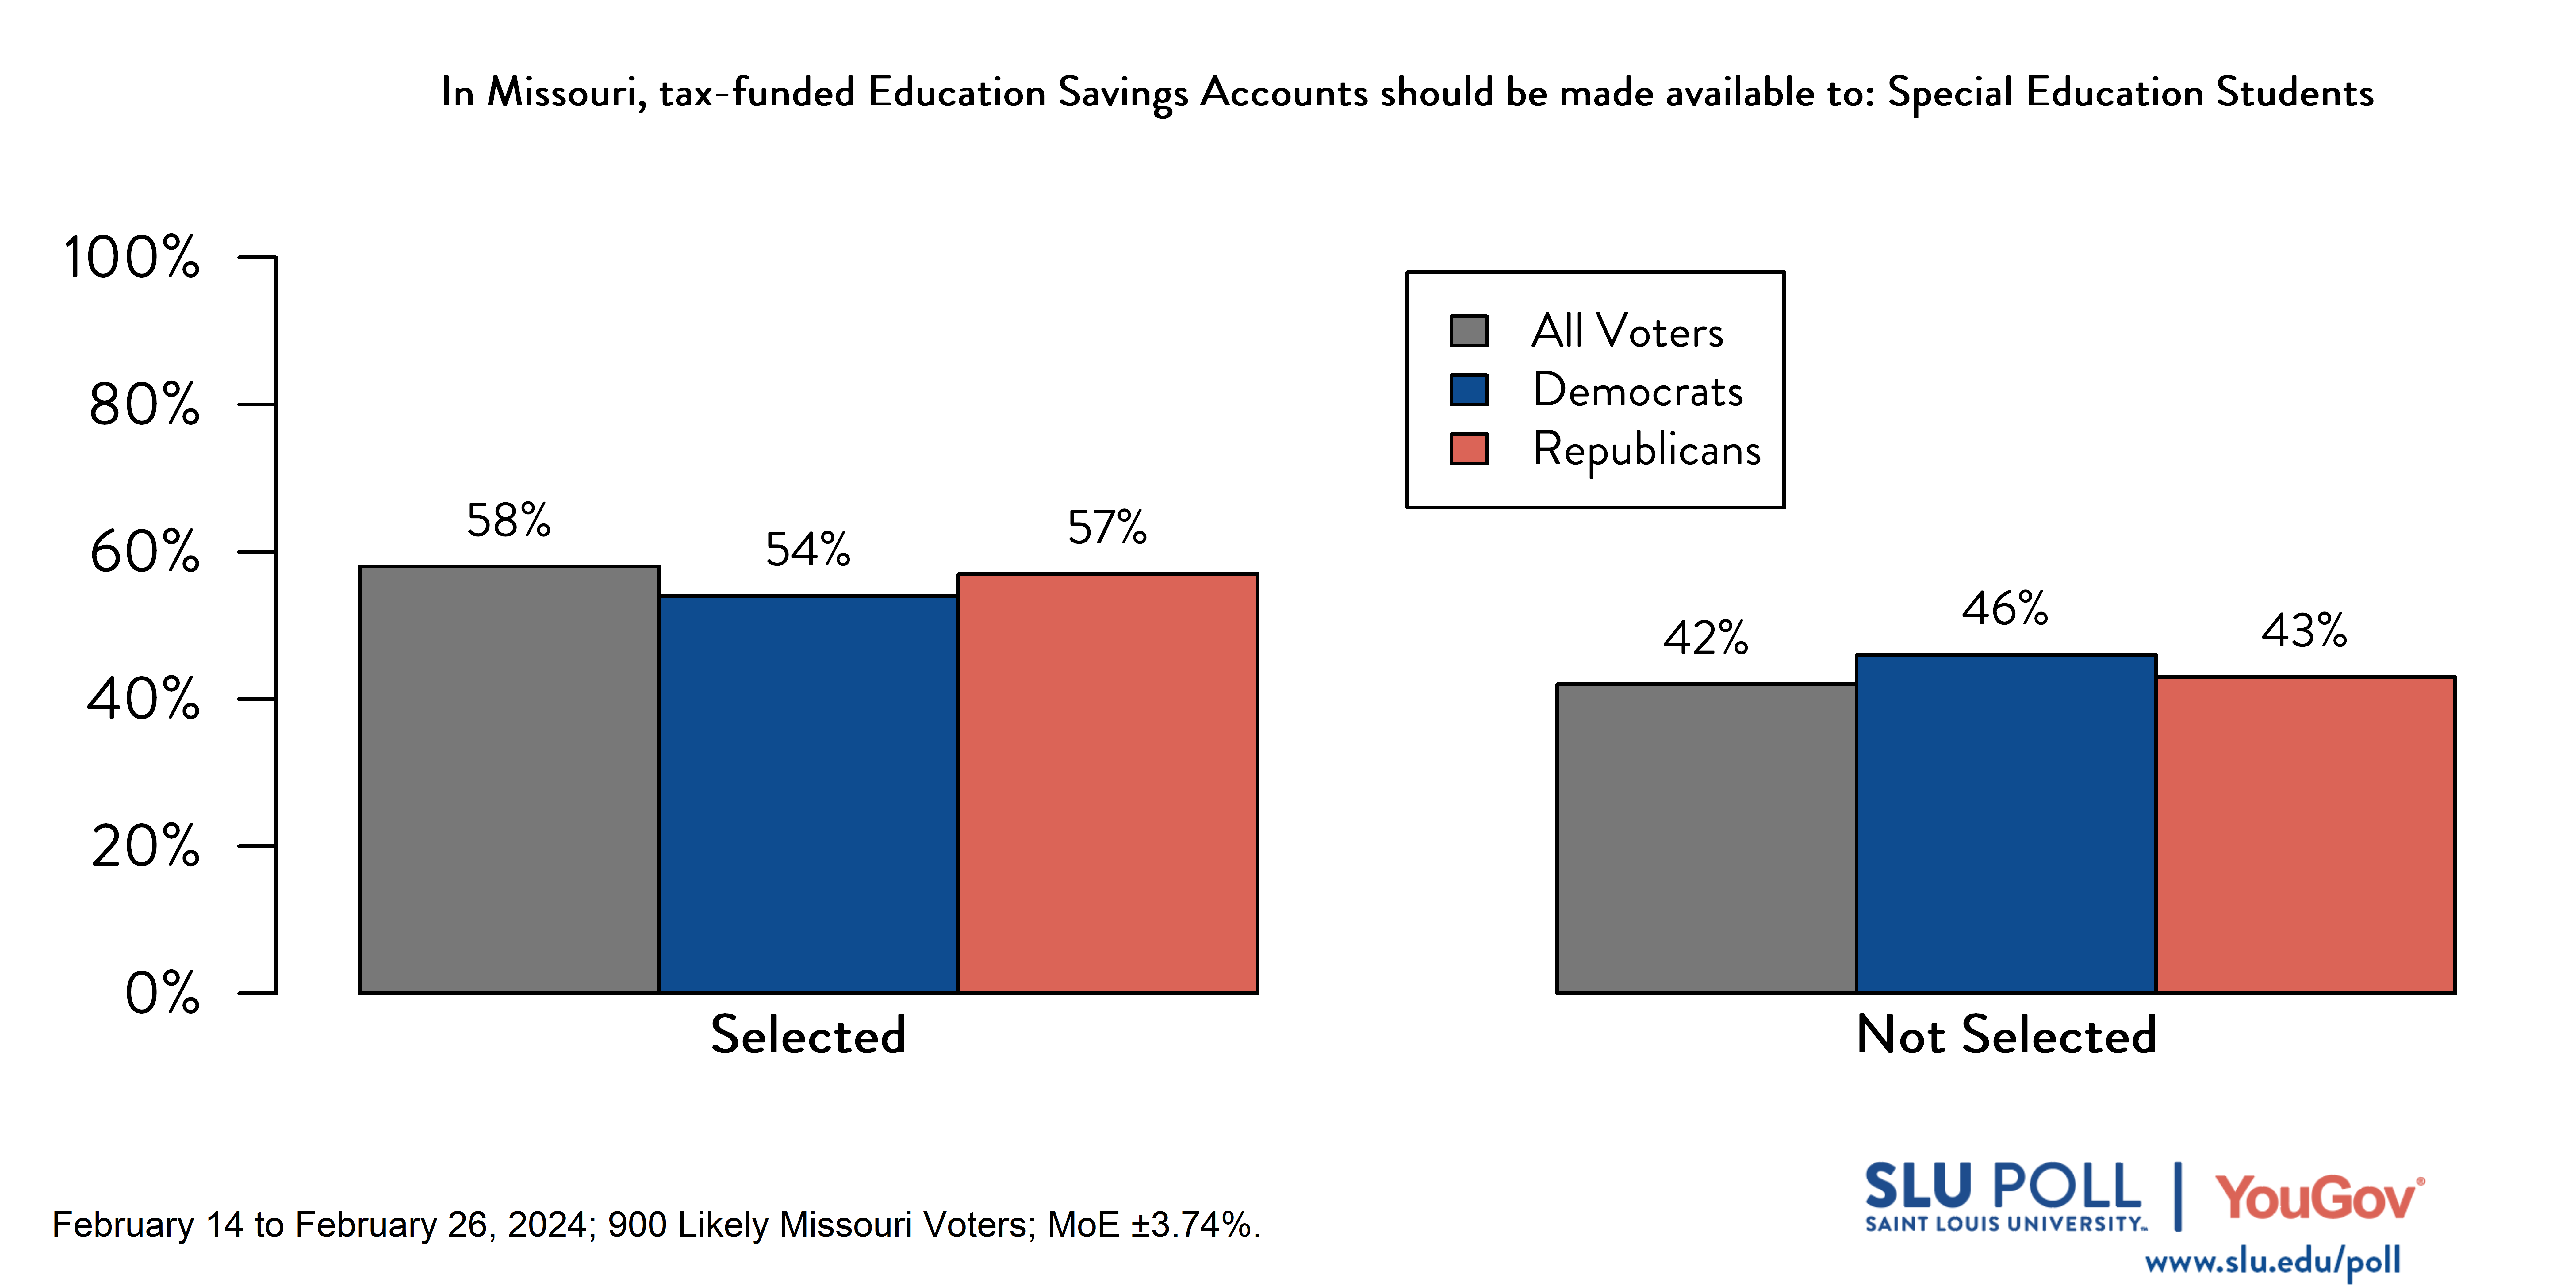 Likely voters' responses to 'In Missouri, tax-funded Education Savings Accounts should be made available to: Students with special education needs': 58% selected, and 42% not selected. Democratic voters' responses: ' 54% selected, and 46% not selected. Republican voters' responses:  57% selected, and 43% not selected.